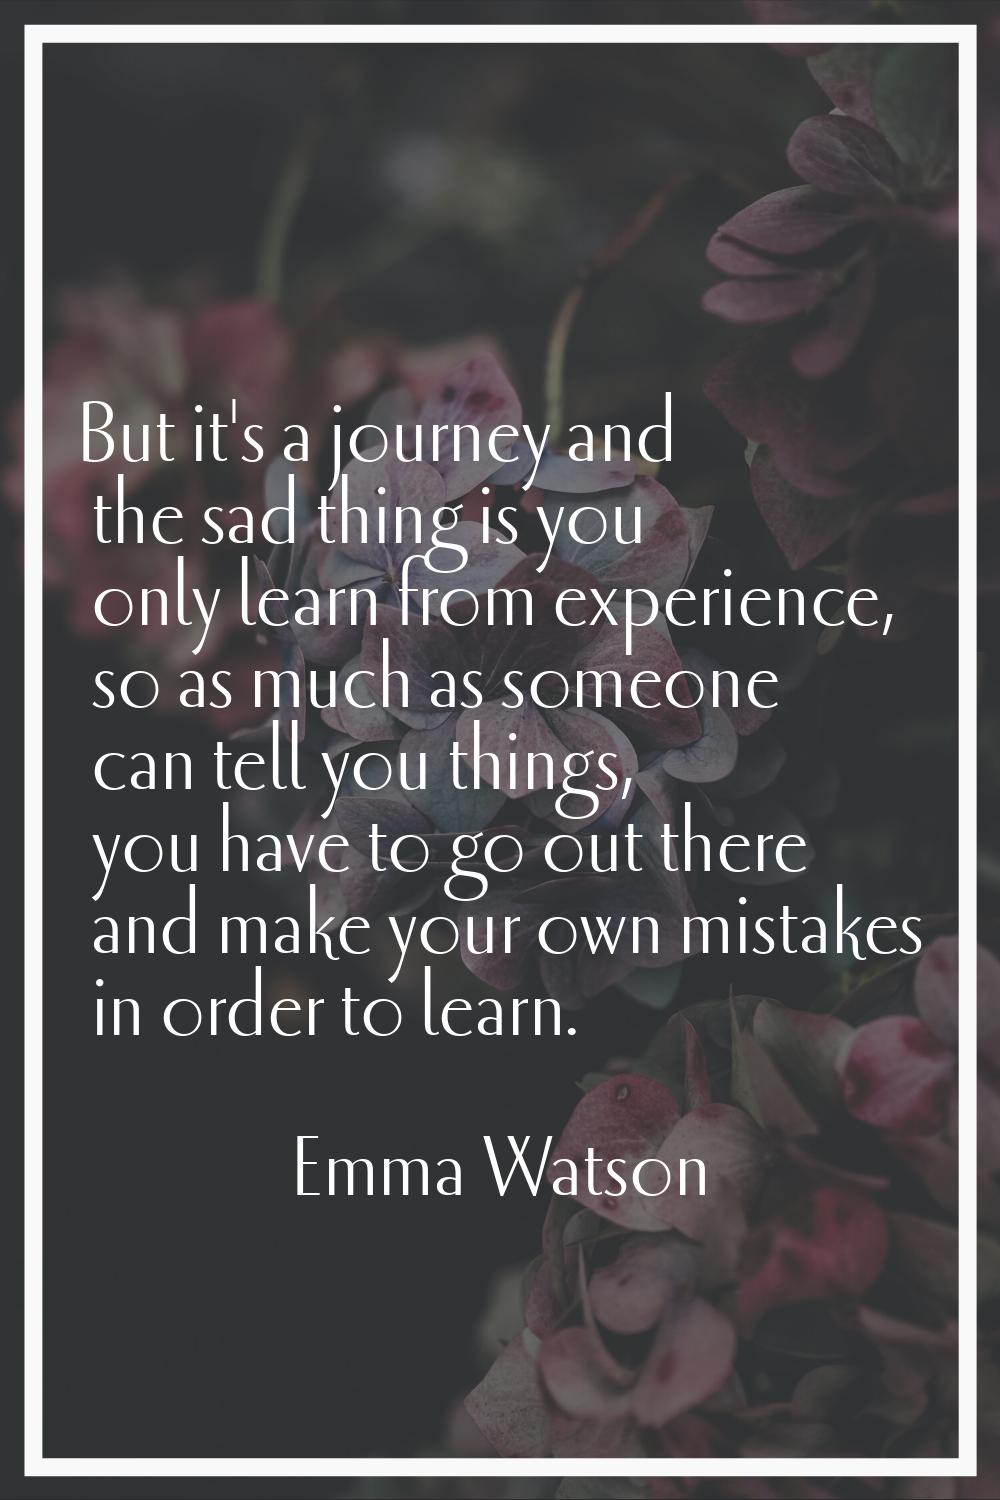 But it's a journey and the sad thing is you only learn from experience, so as much as someone can t